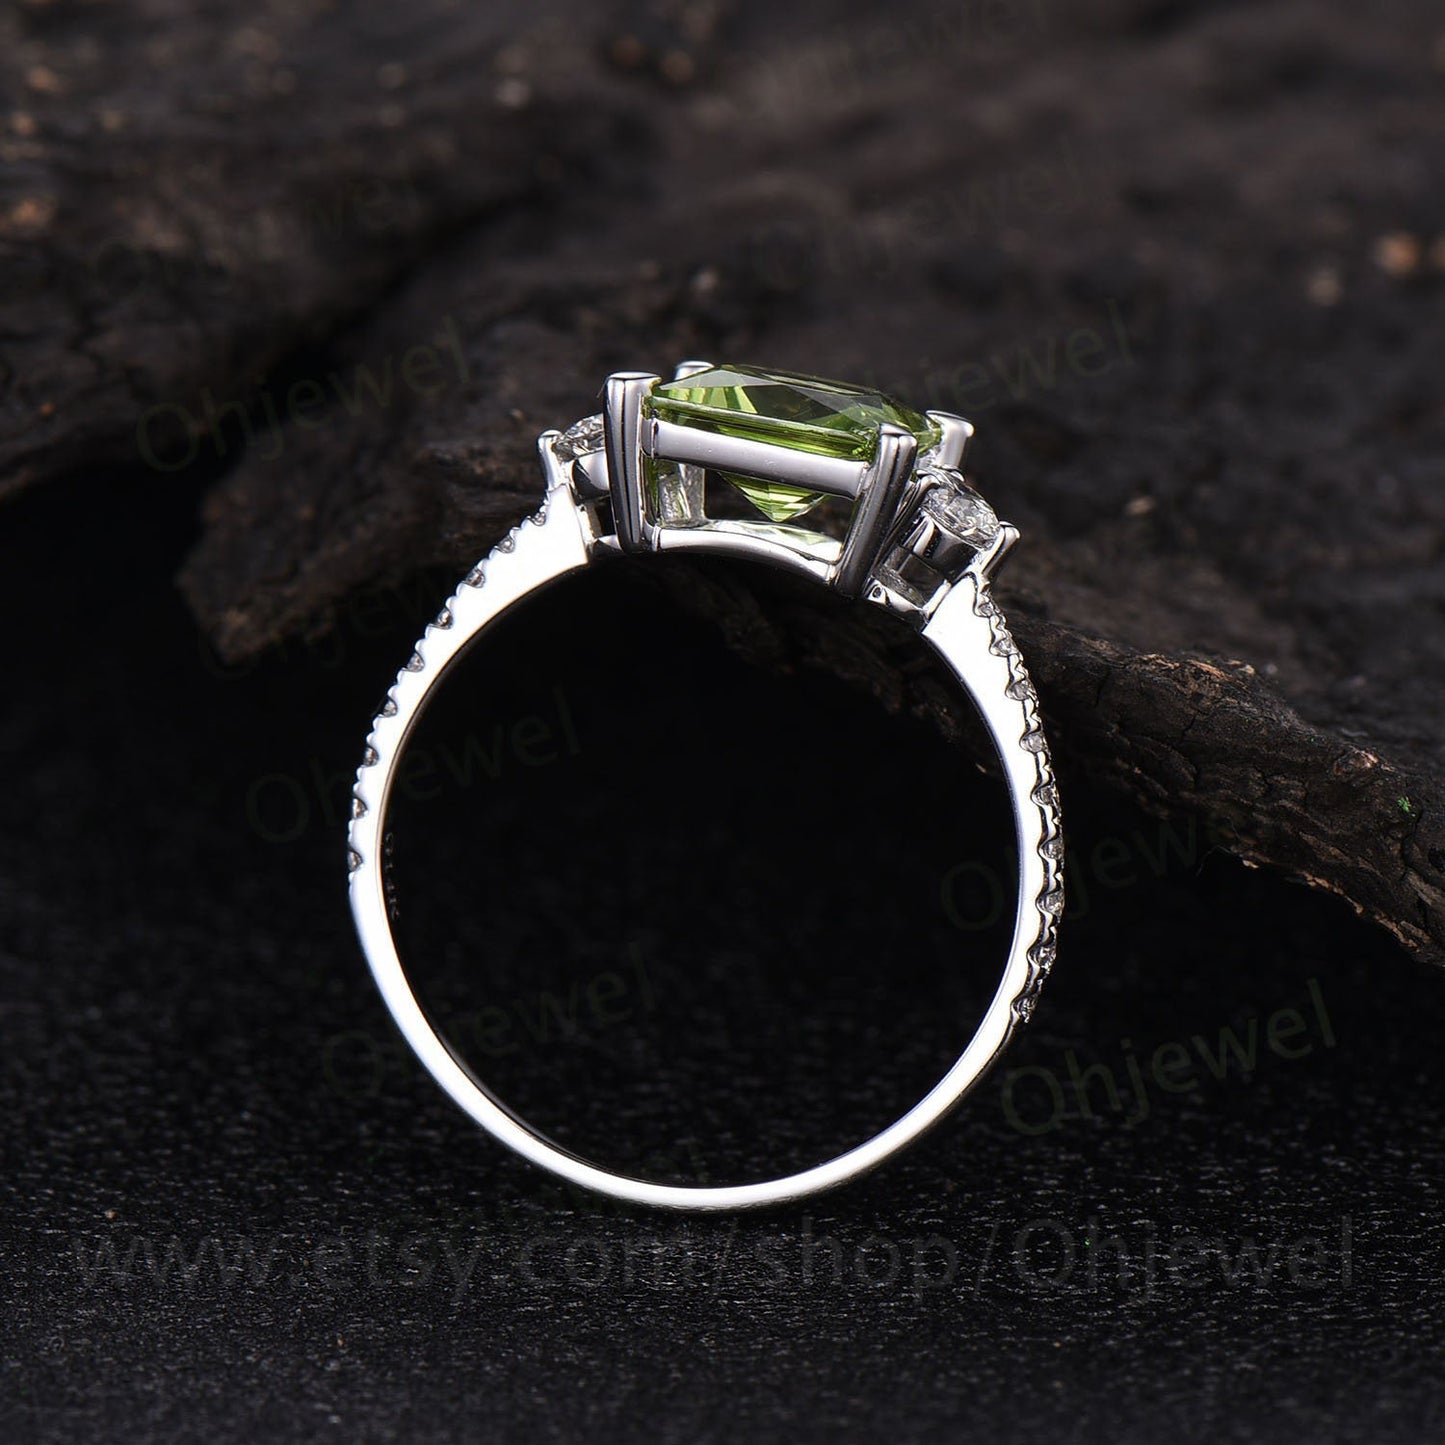 Princess cut engagement ring vintage peridot engagement ring moissanite rings for women solid white gold birthday gift peridot jewelry